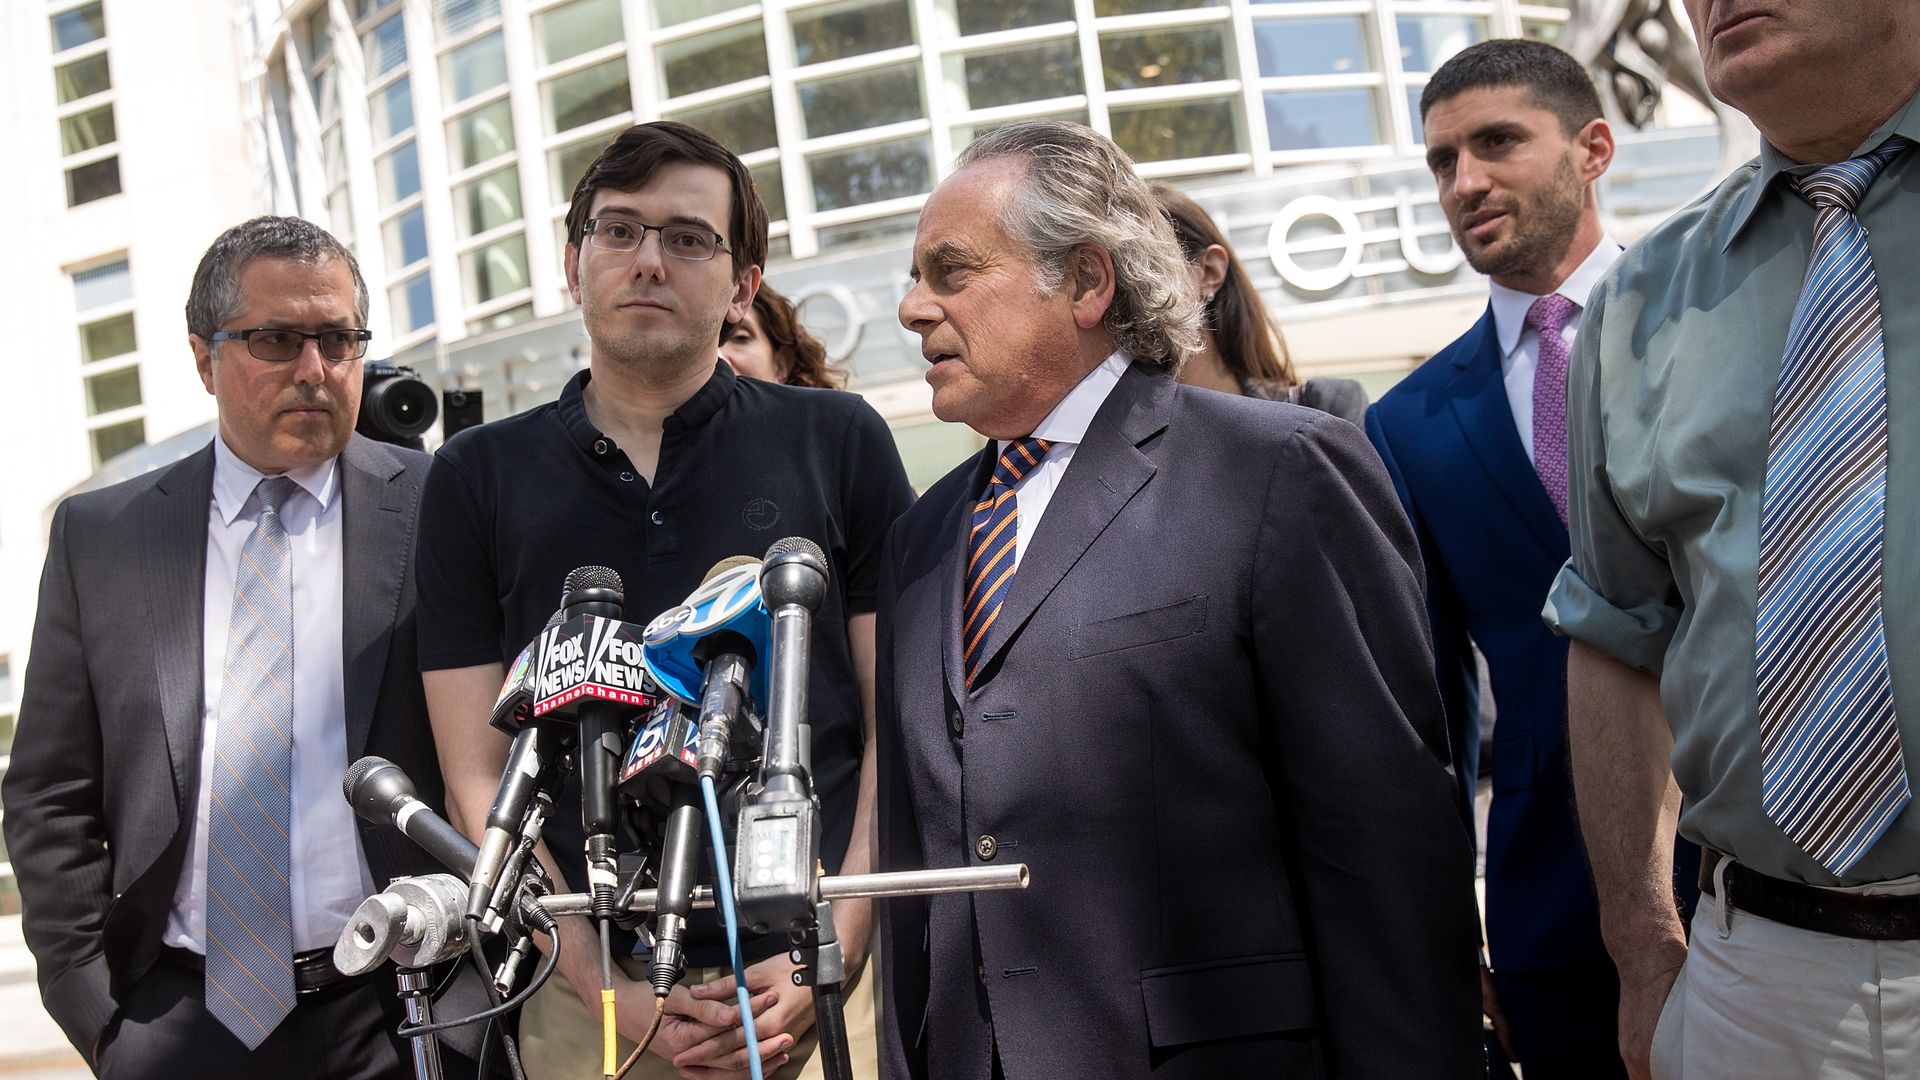 Martin Shkreli with his Lawyer and others.  